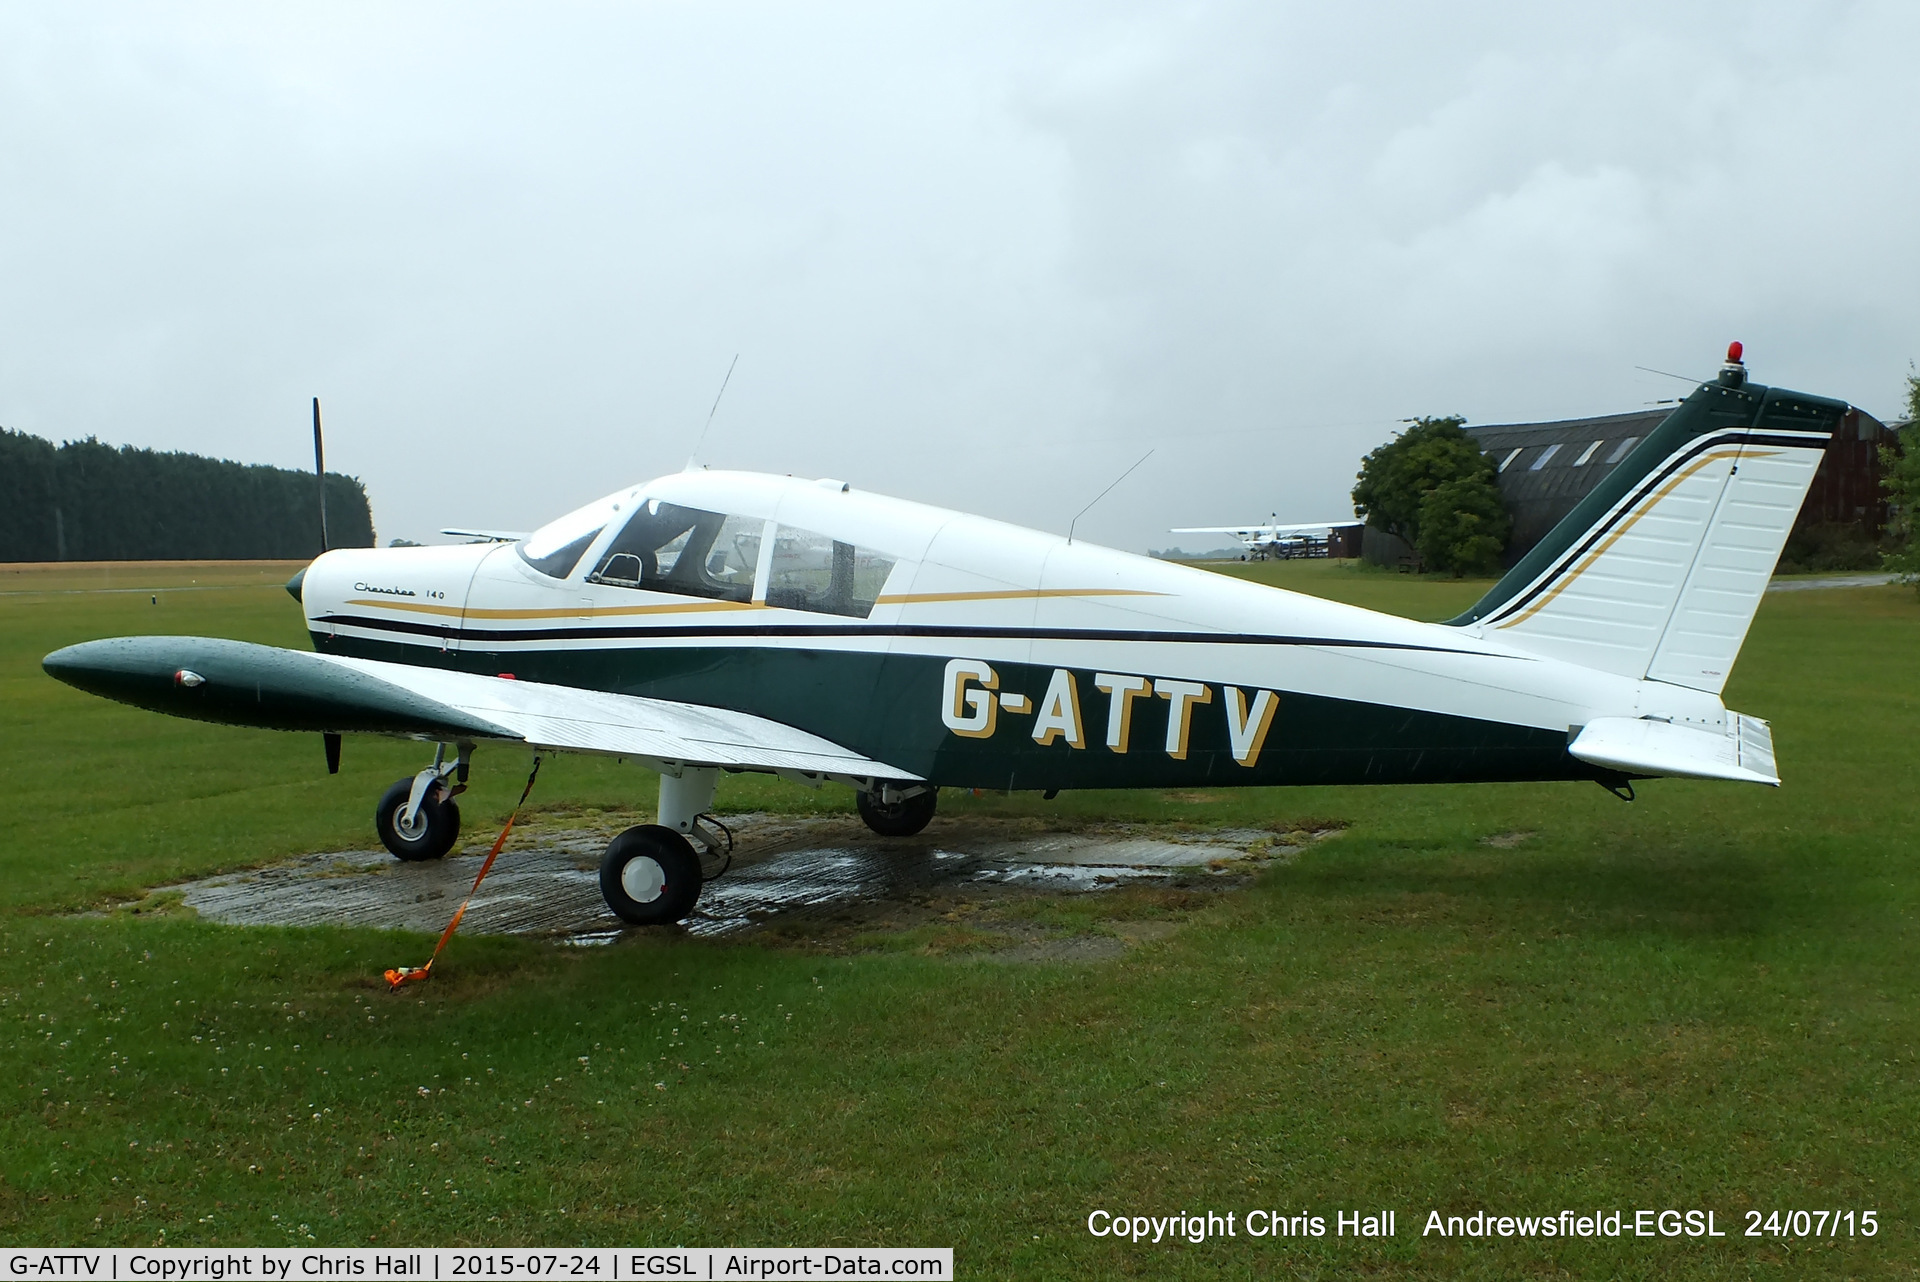 G-ATTV, 1966 Piper PA-28-140 Cherokee C/N 28-21991, nice new colour scheme on this Andrewsfield resident